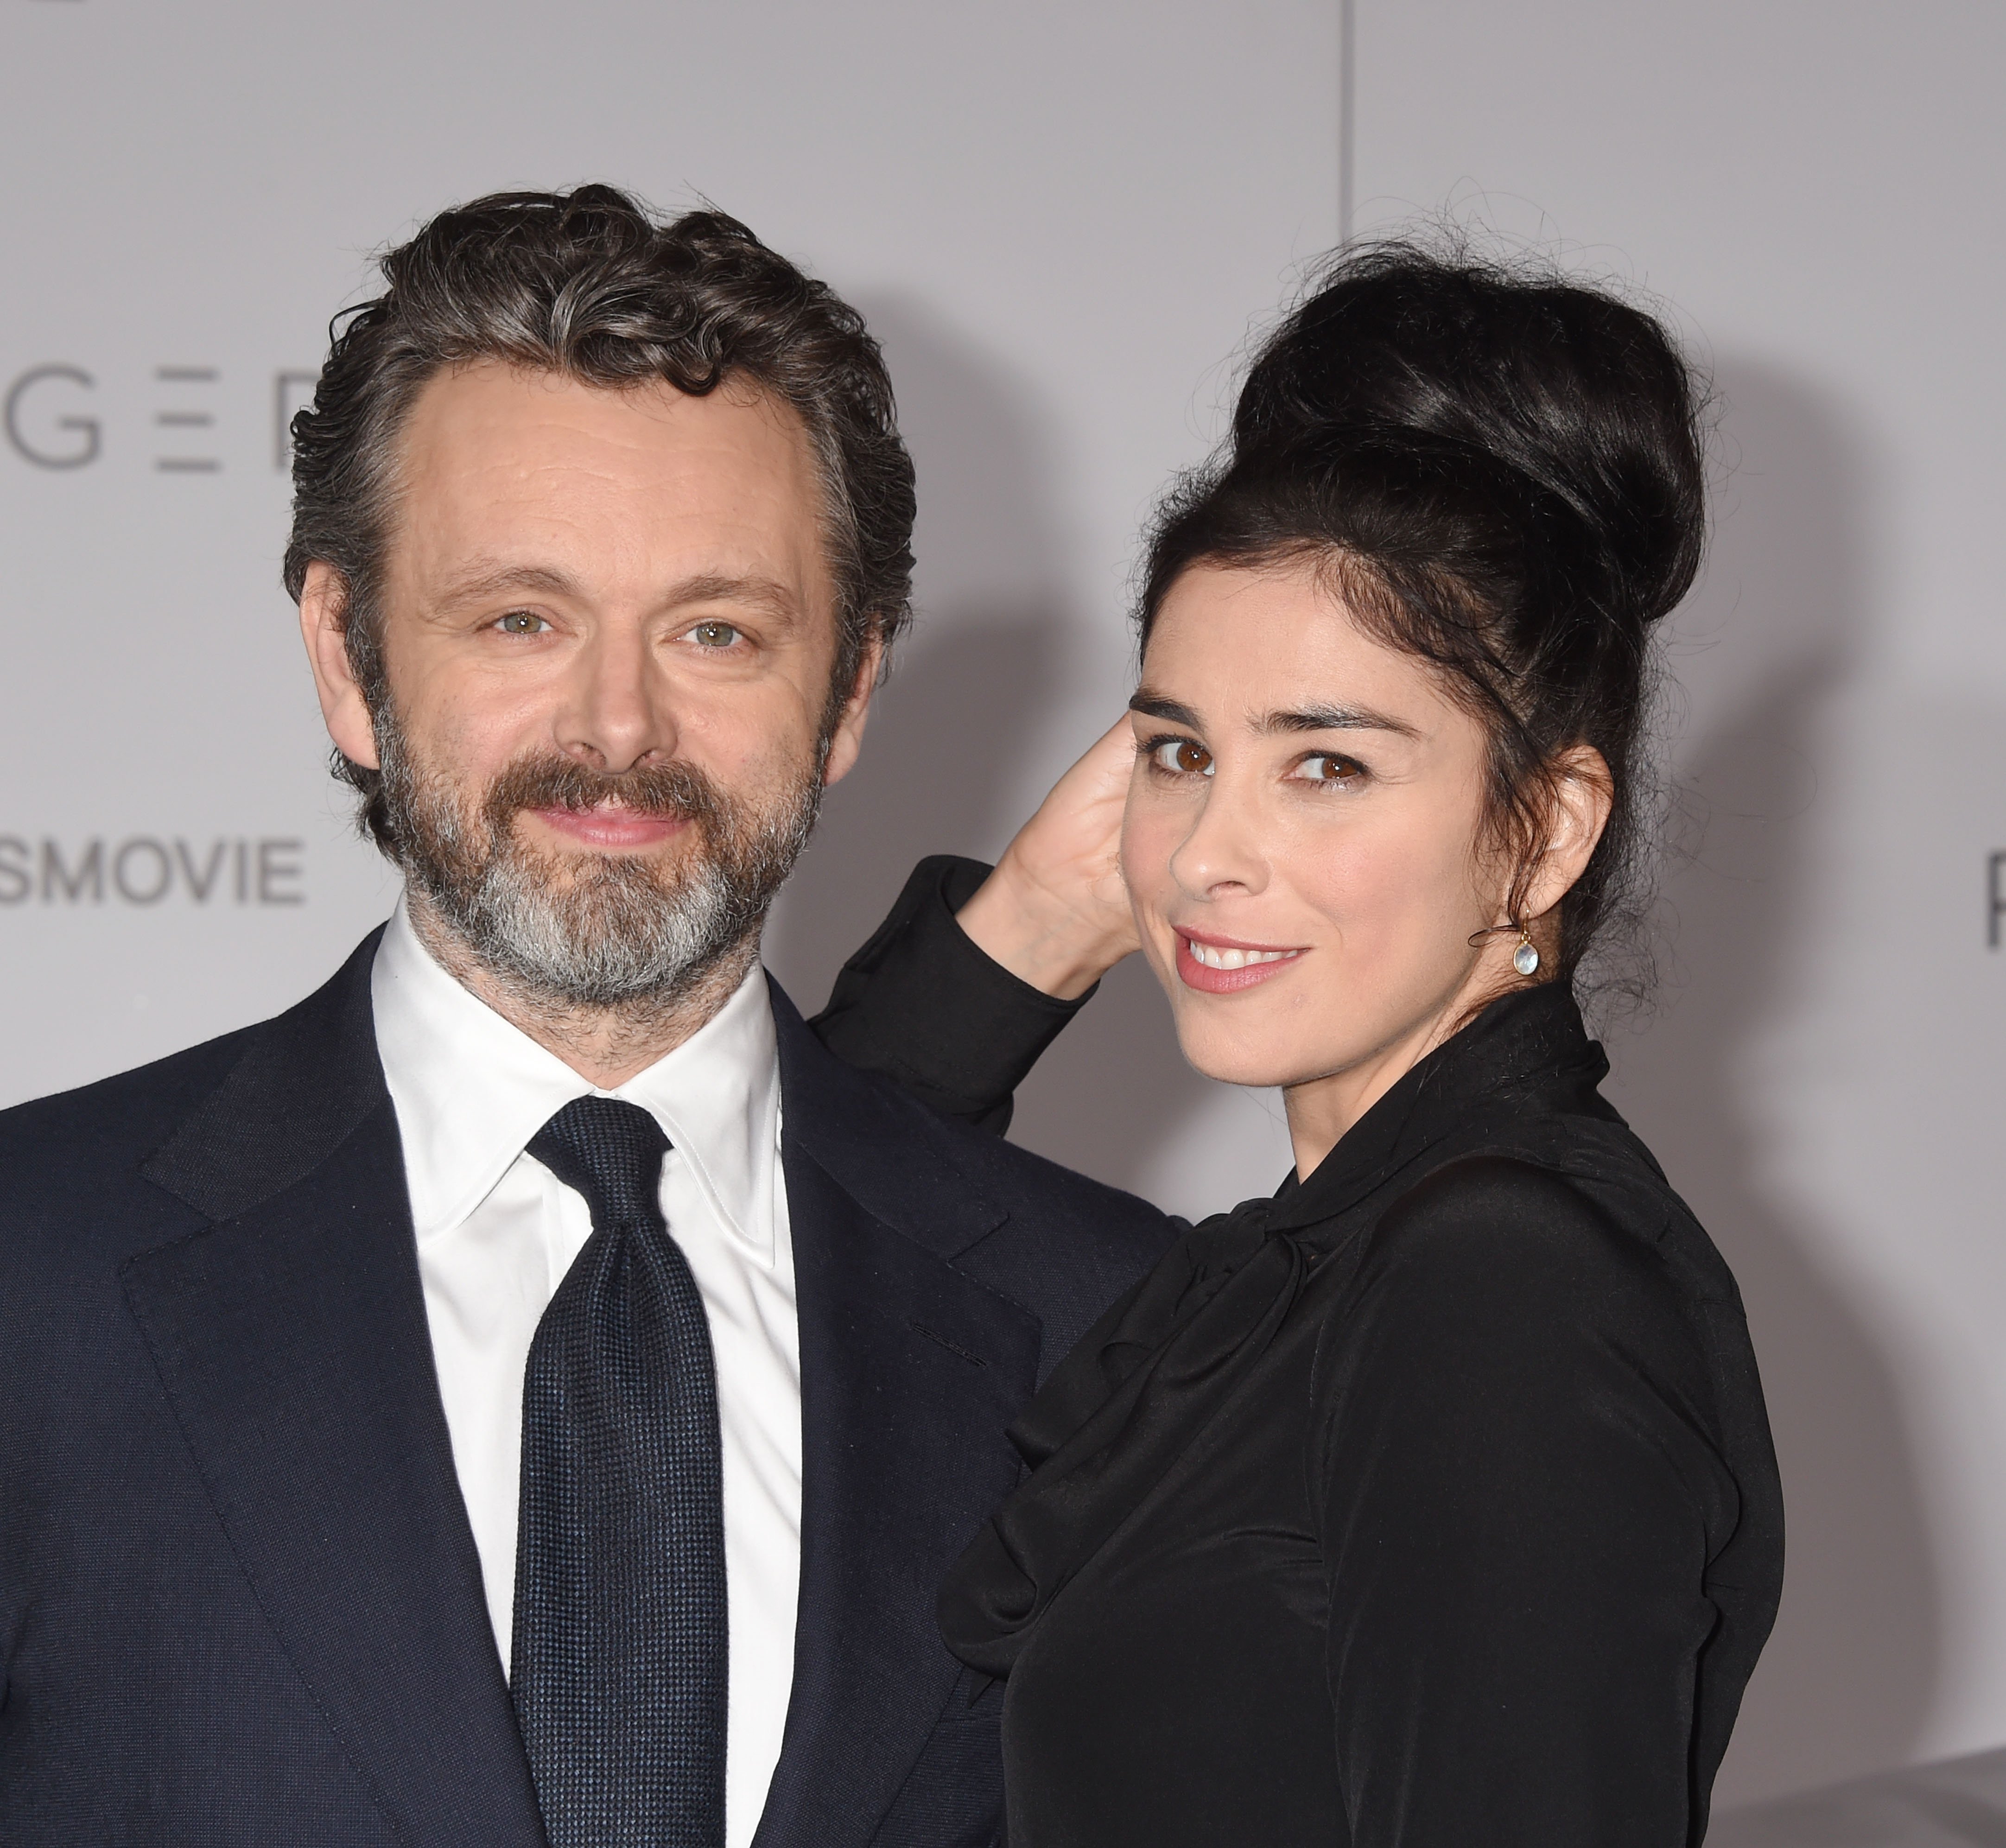 Michael Sheen and Sarah Silverman at the Columbia Pictures'"Passengers" premiere on December 14, 2016, in Westwood, California. | Source: Getty Images